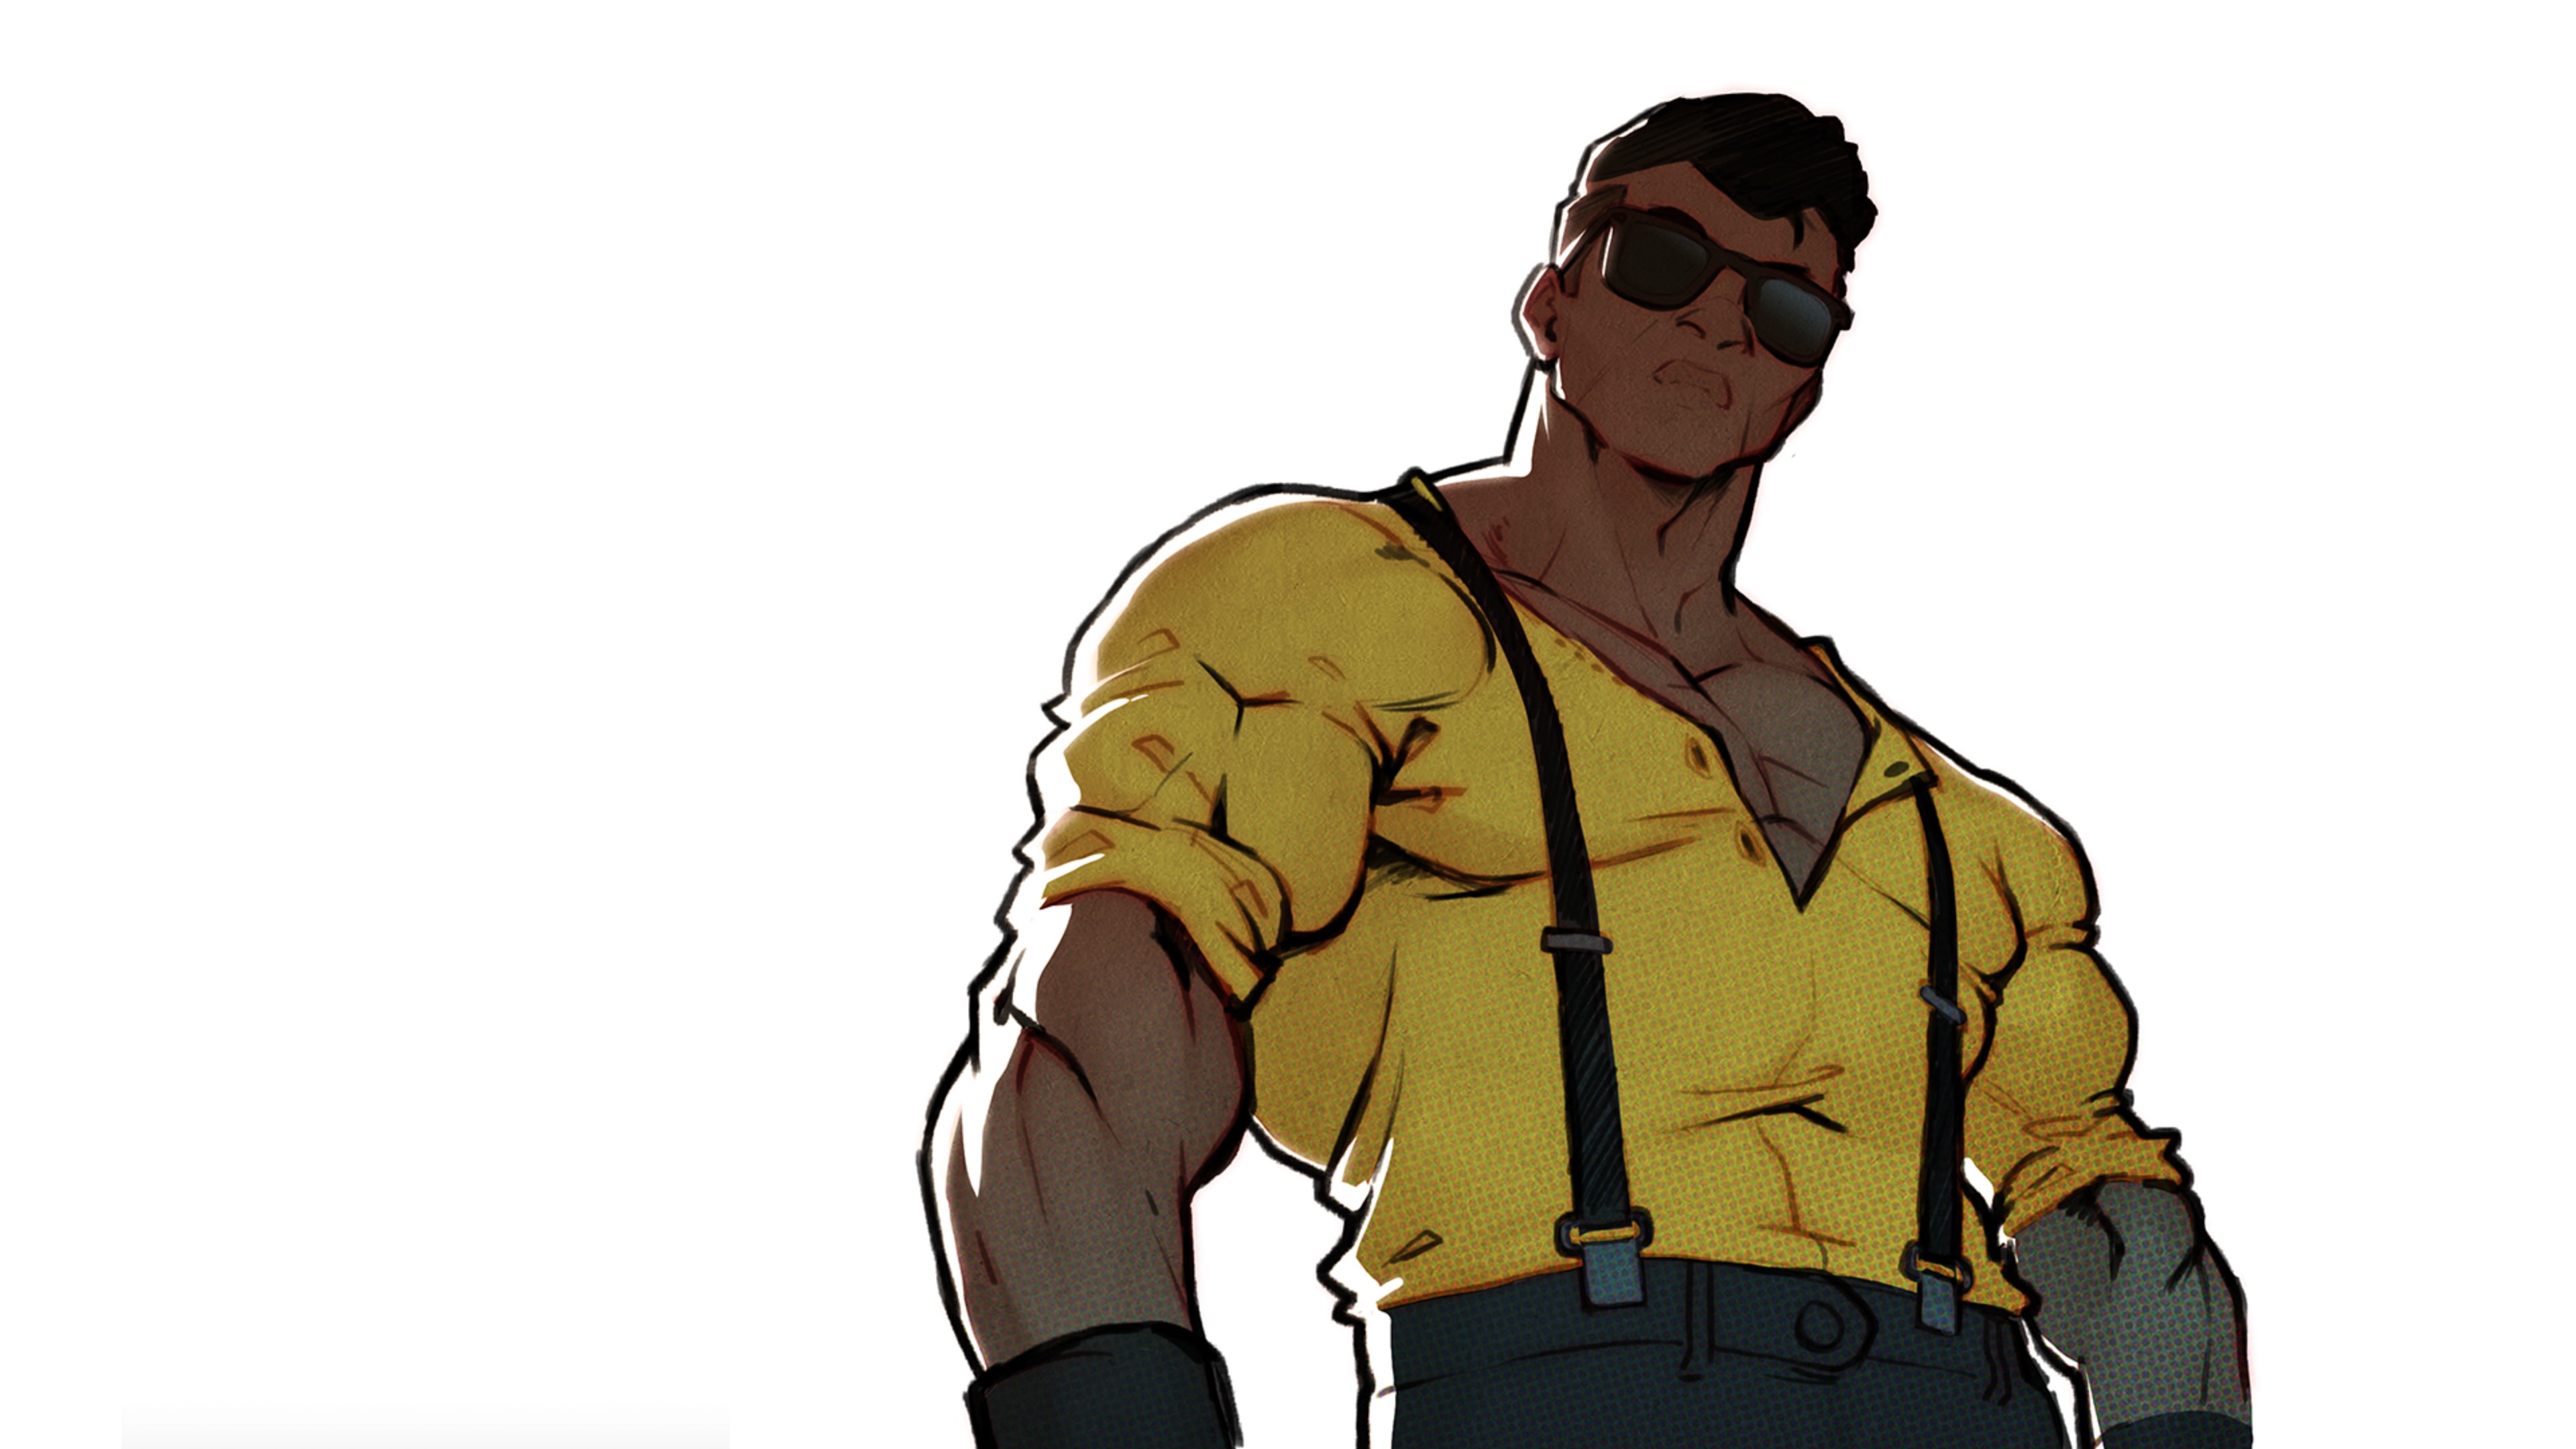 General 3840x2160 Streets of Rage Streets of Rage 4 simple background video game art illustration Adam Hunter muscles biceps shirt white background video game men sunglasses video game warriors